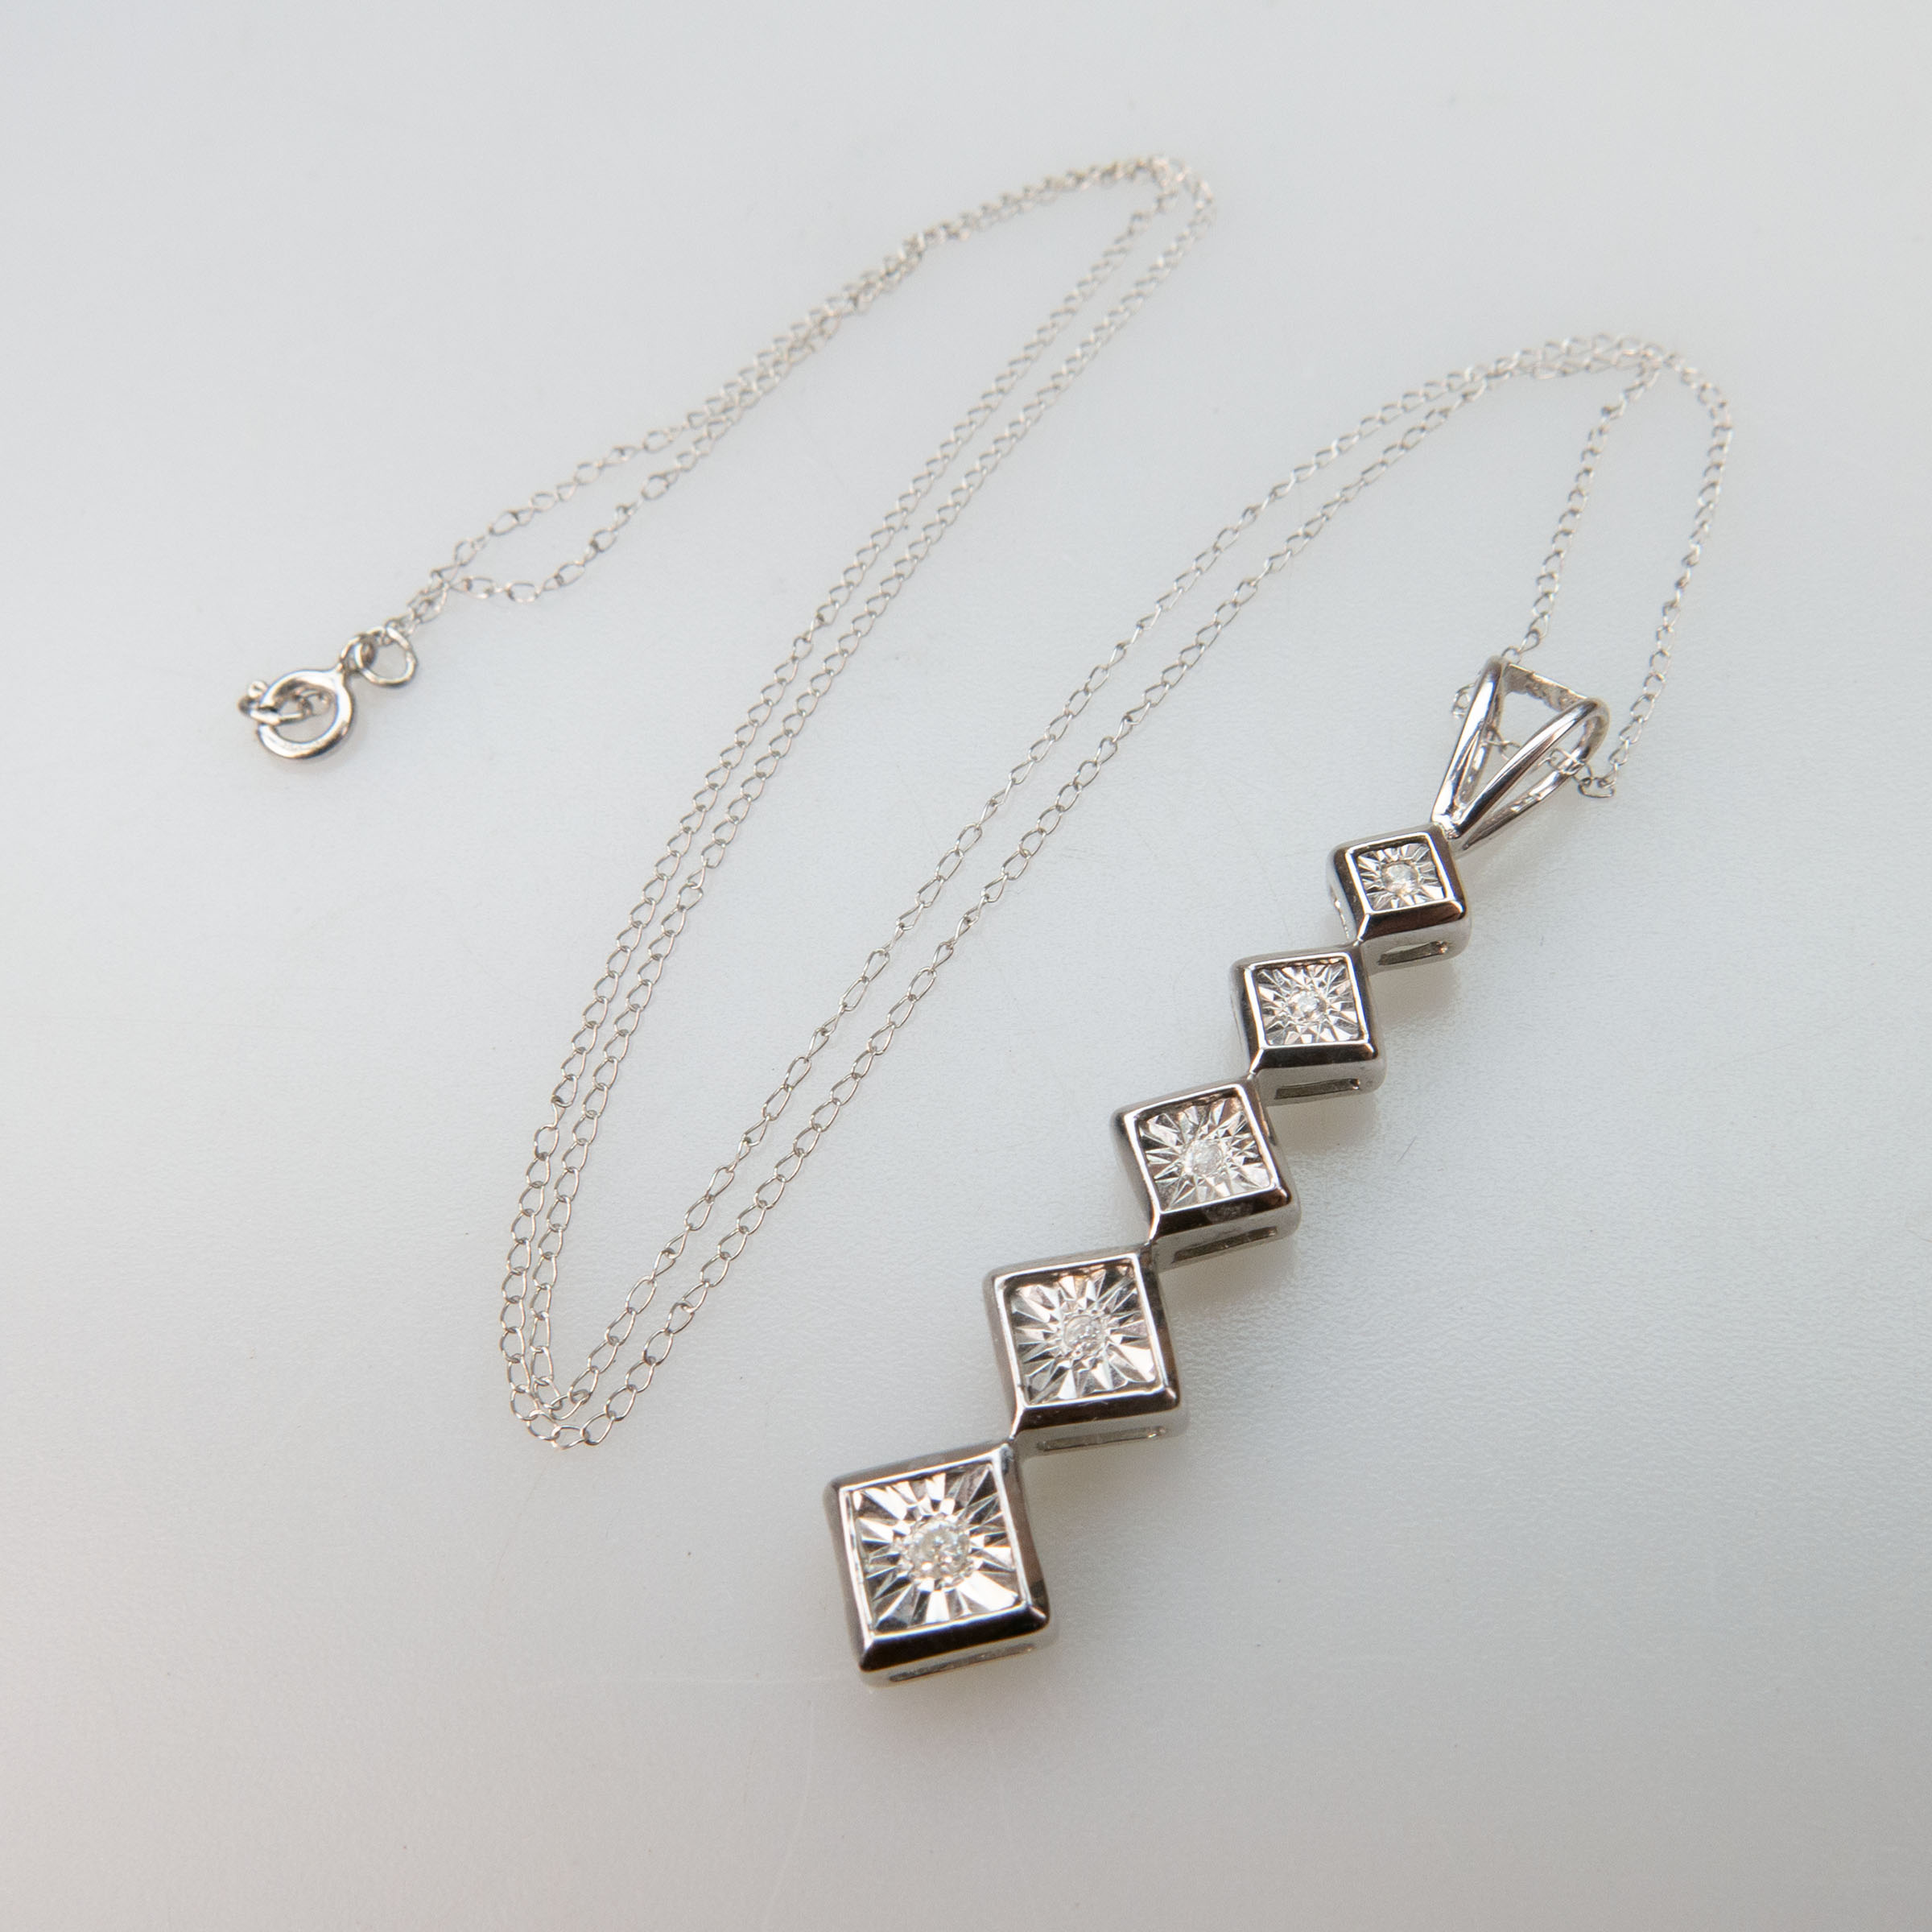 10k White Gold Pendant And Chain